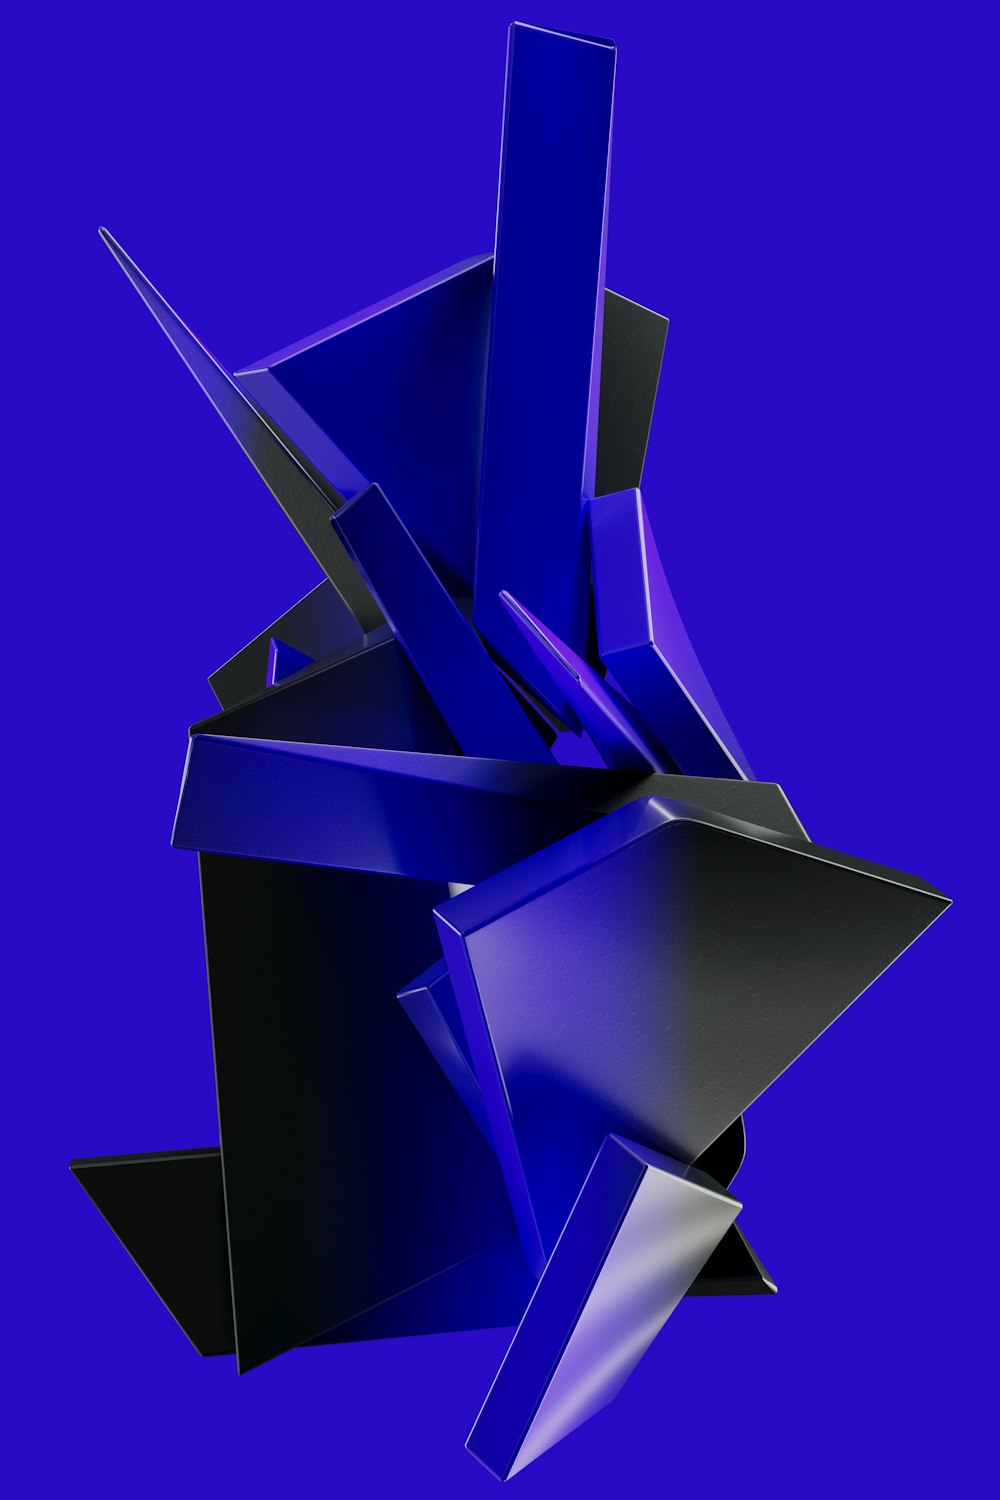 a blue abstract object is shown against a purple background